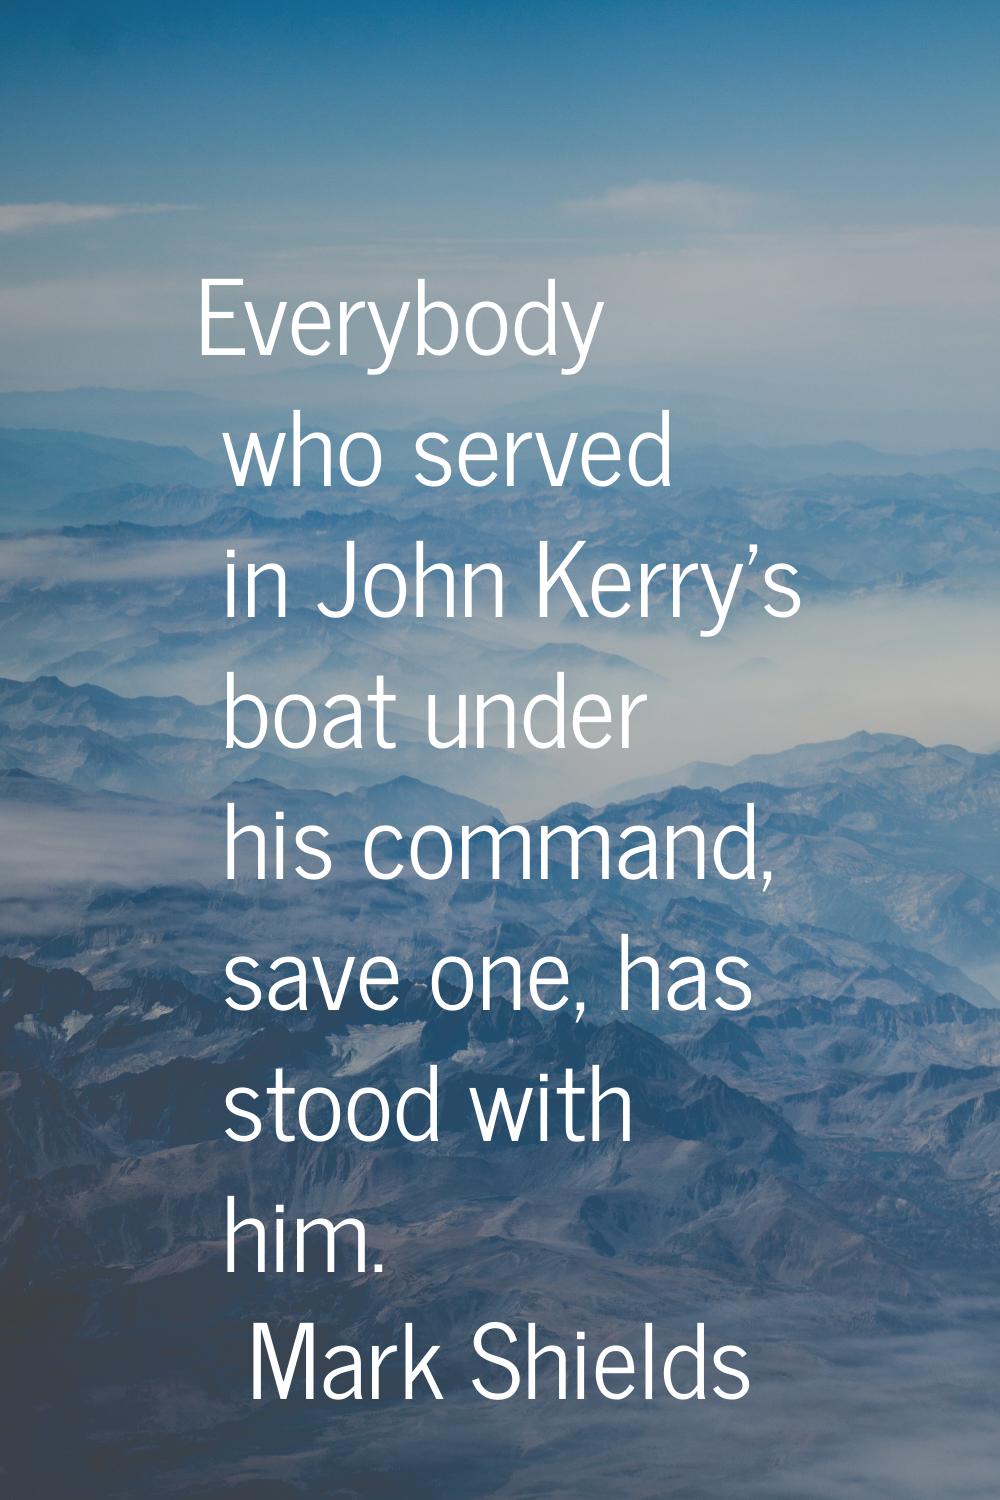 Everybody who served in John Kerry's boat under his command, save one, has stood with him.